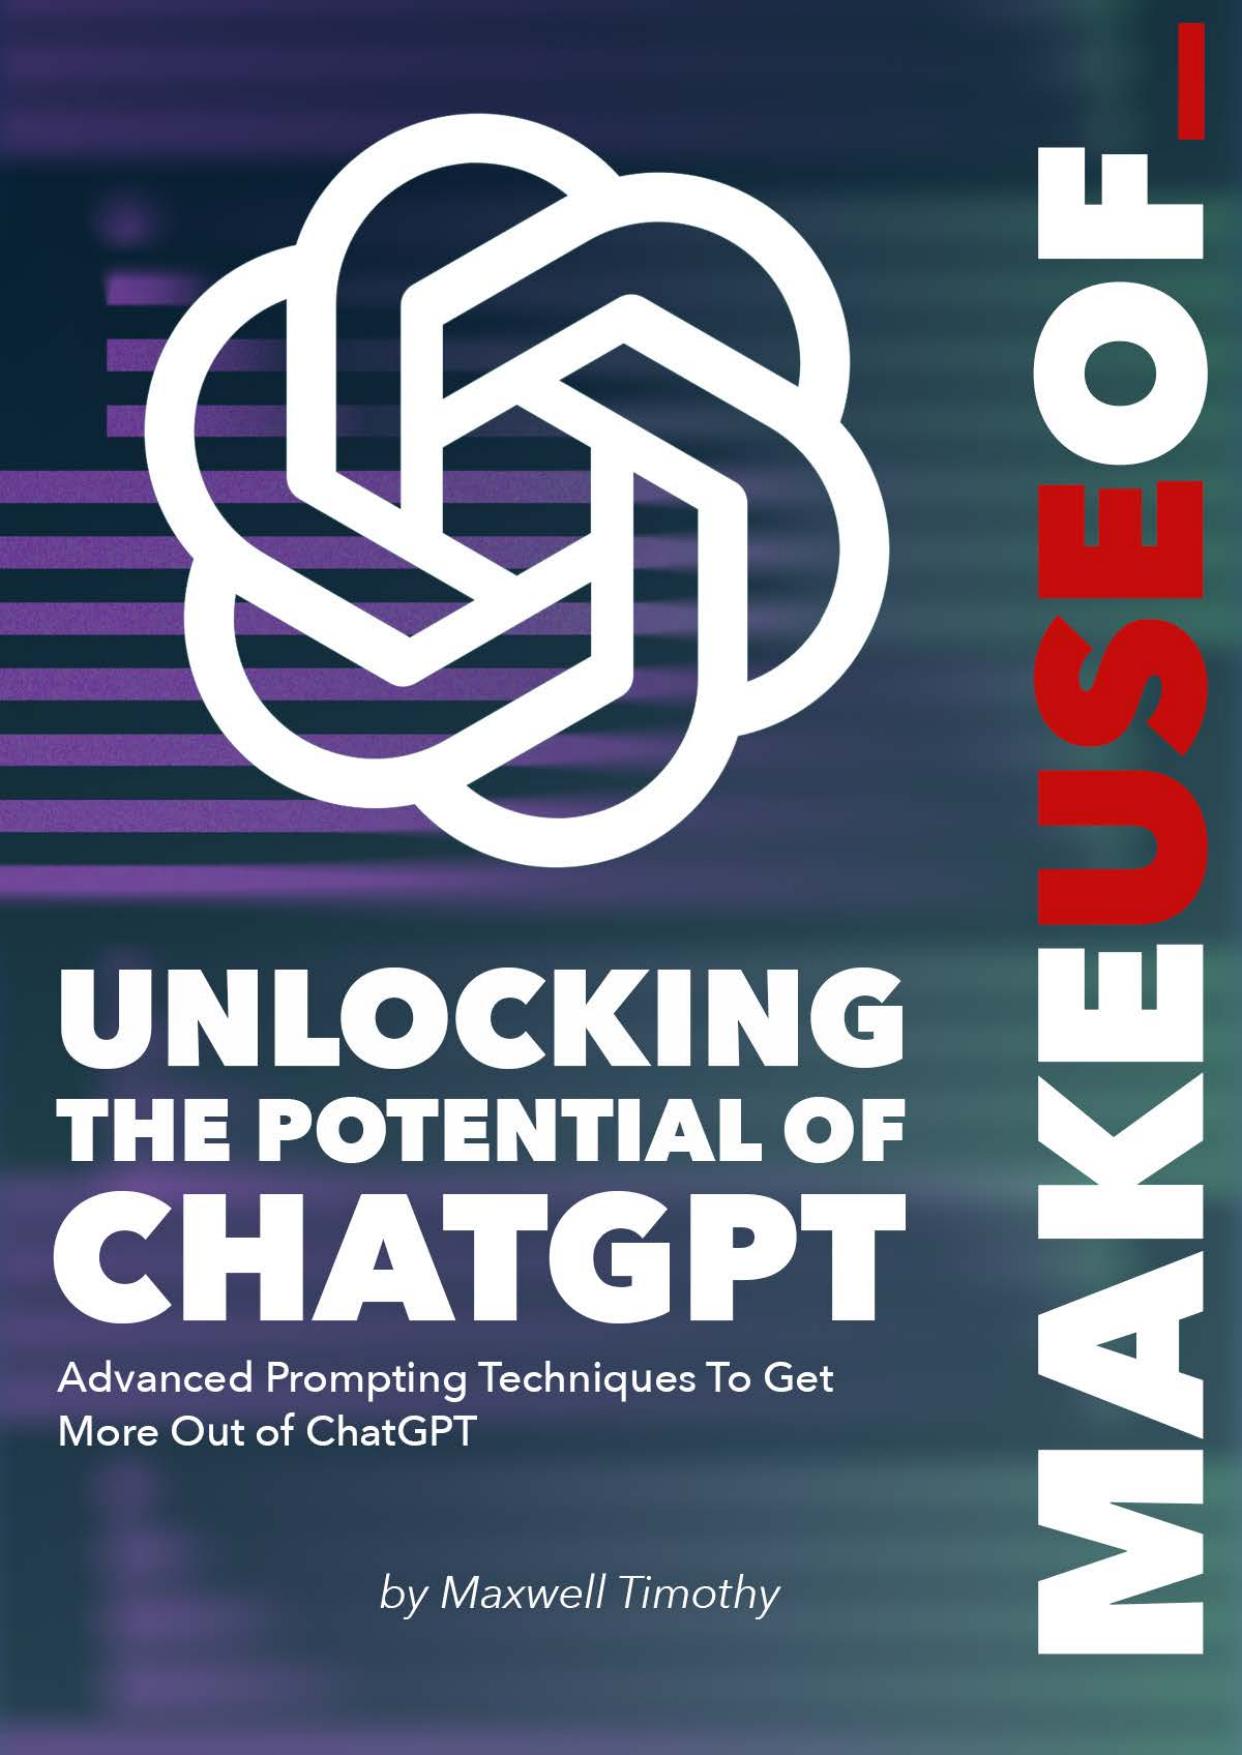 Unlocking the Potential of ChatGPT